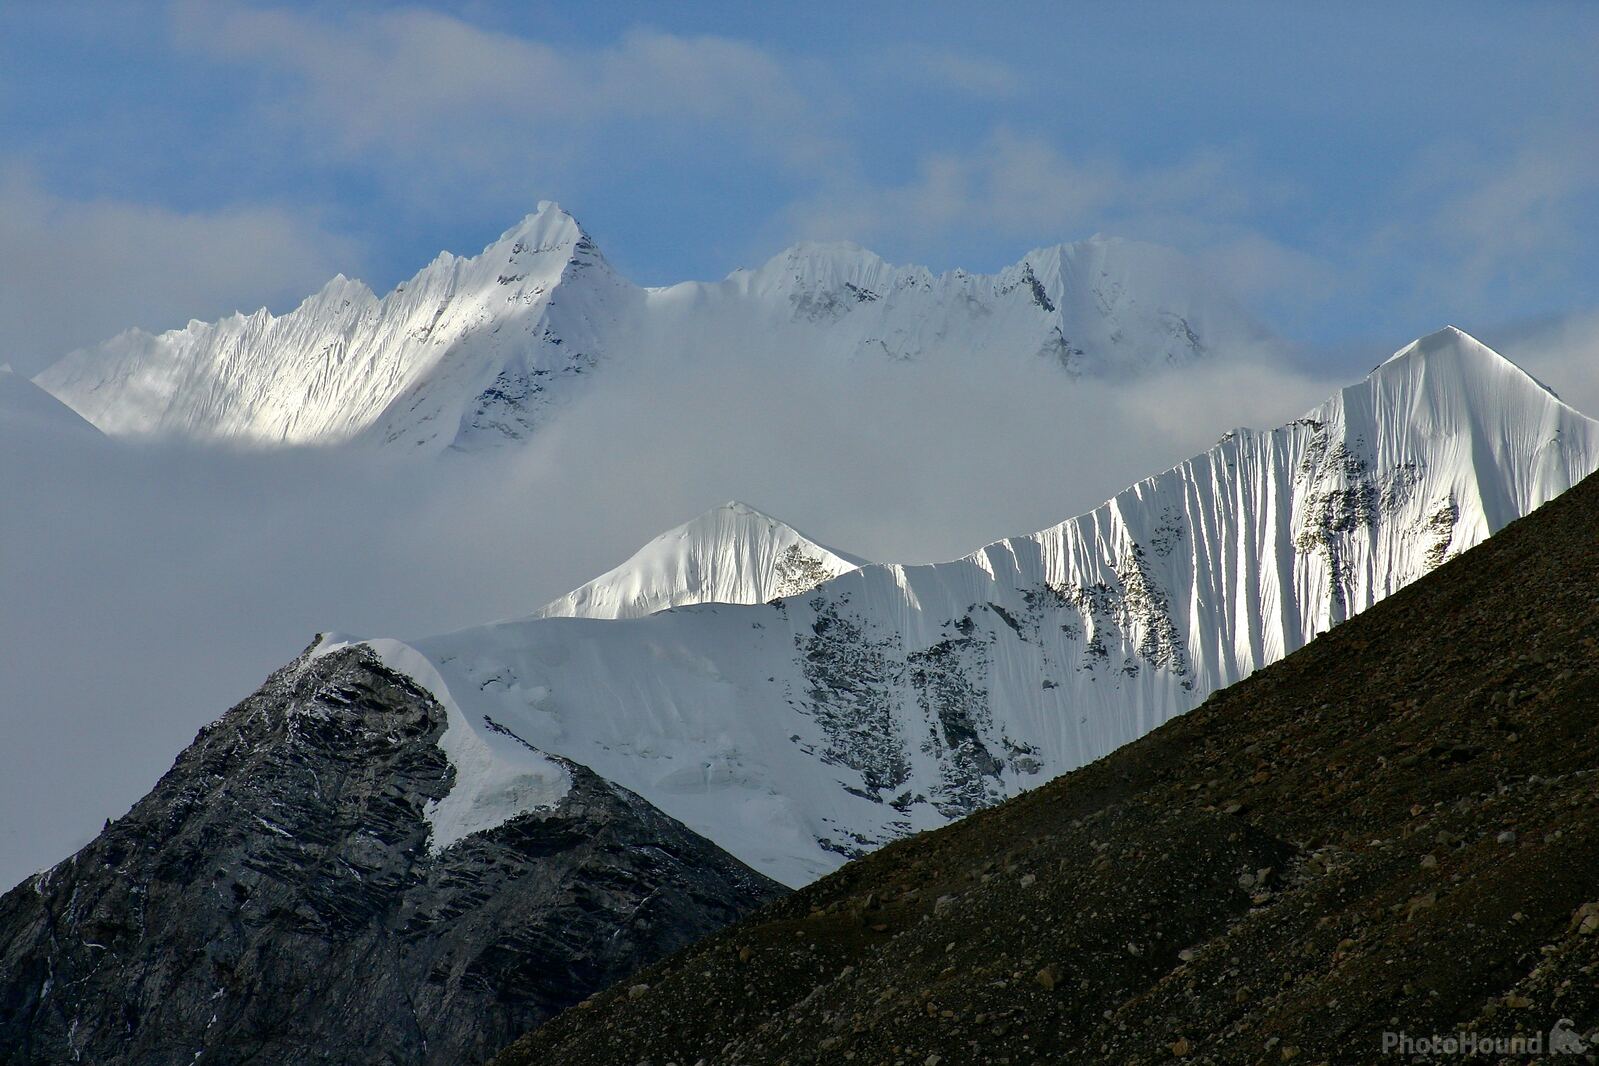 Image of Mount Everest from Base Camp in Tibet by Team PhotoHound